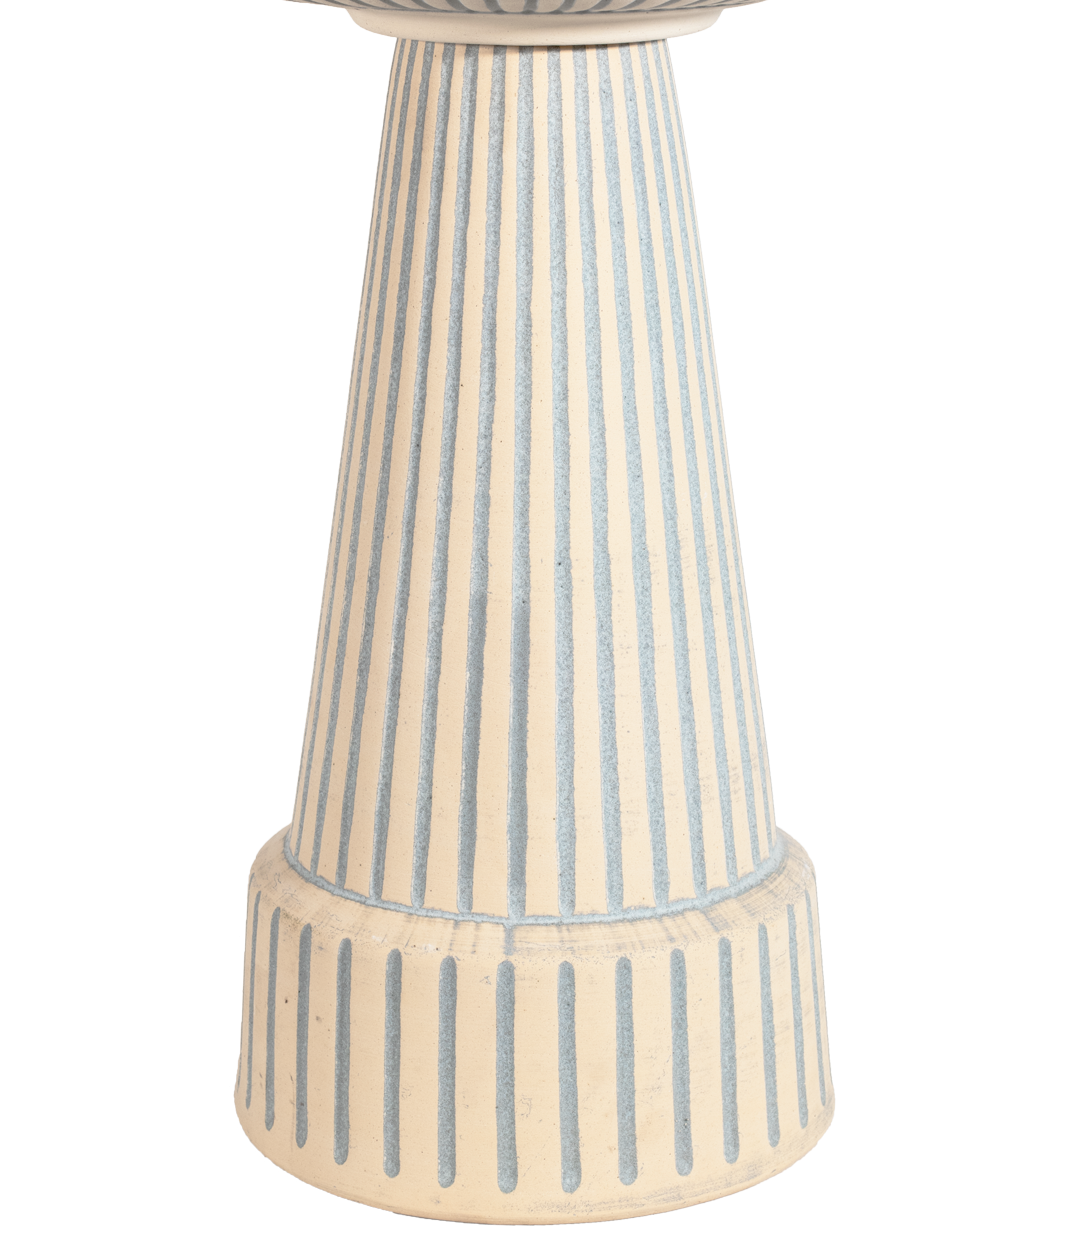 ceramic clay light blue stained pedestal with vertical stripes